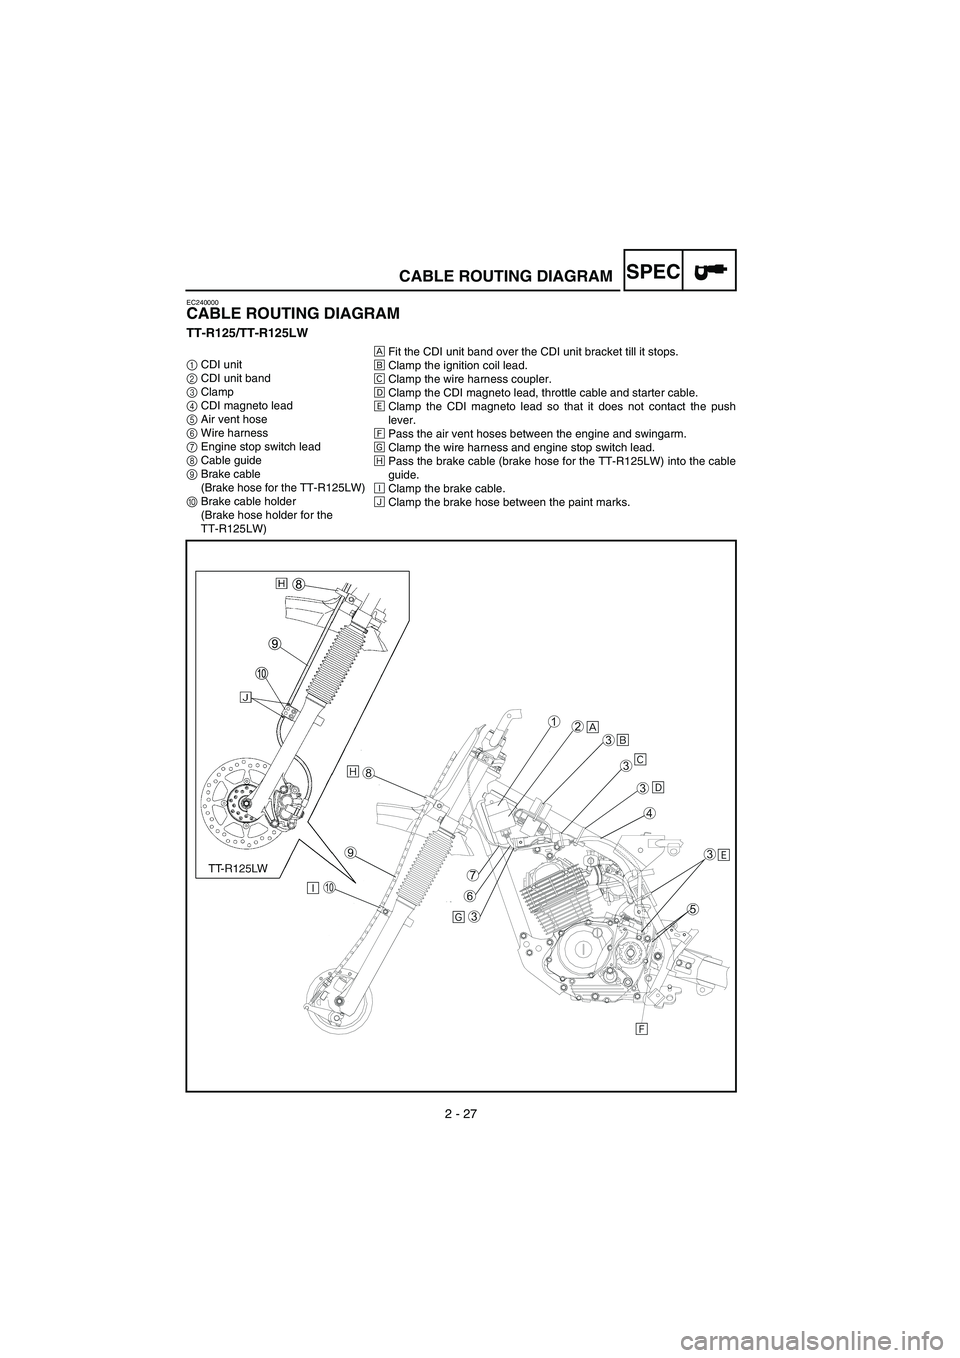 YAMAHA TTR125 2006  Betriebsanleitungen (in German) 152 - A - V
2 - 27
SPEC
EC240000
CABLE ROUTING DIAGRAM
TT-R125/TT-R125LW
1 CDI unit
2  CDI unit band
3  Clamp
4  CDI magneto lead
5  Air vent hose
6  Wire harness
7  Engine stop switch lead
8  Cable g